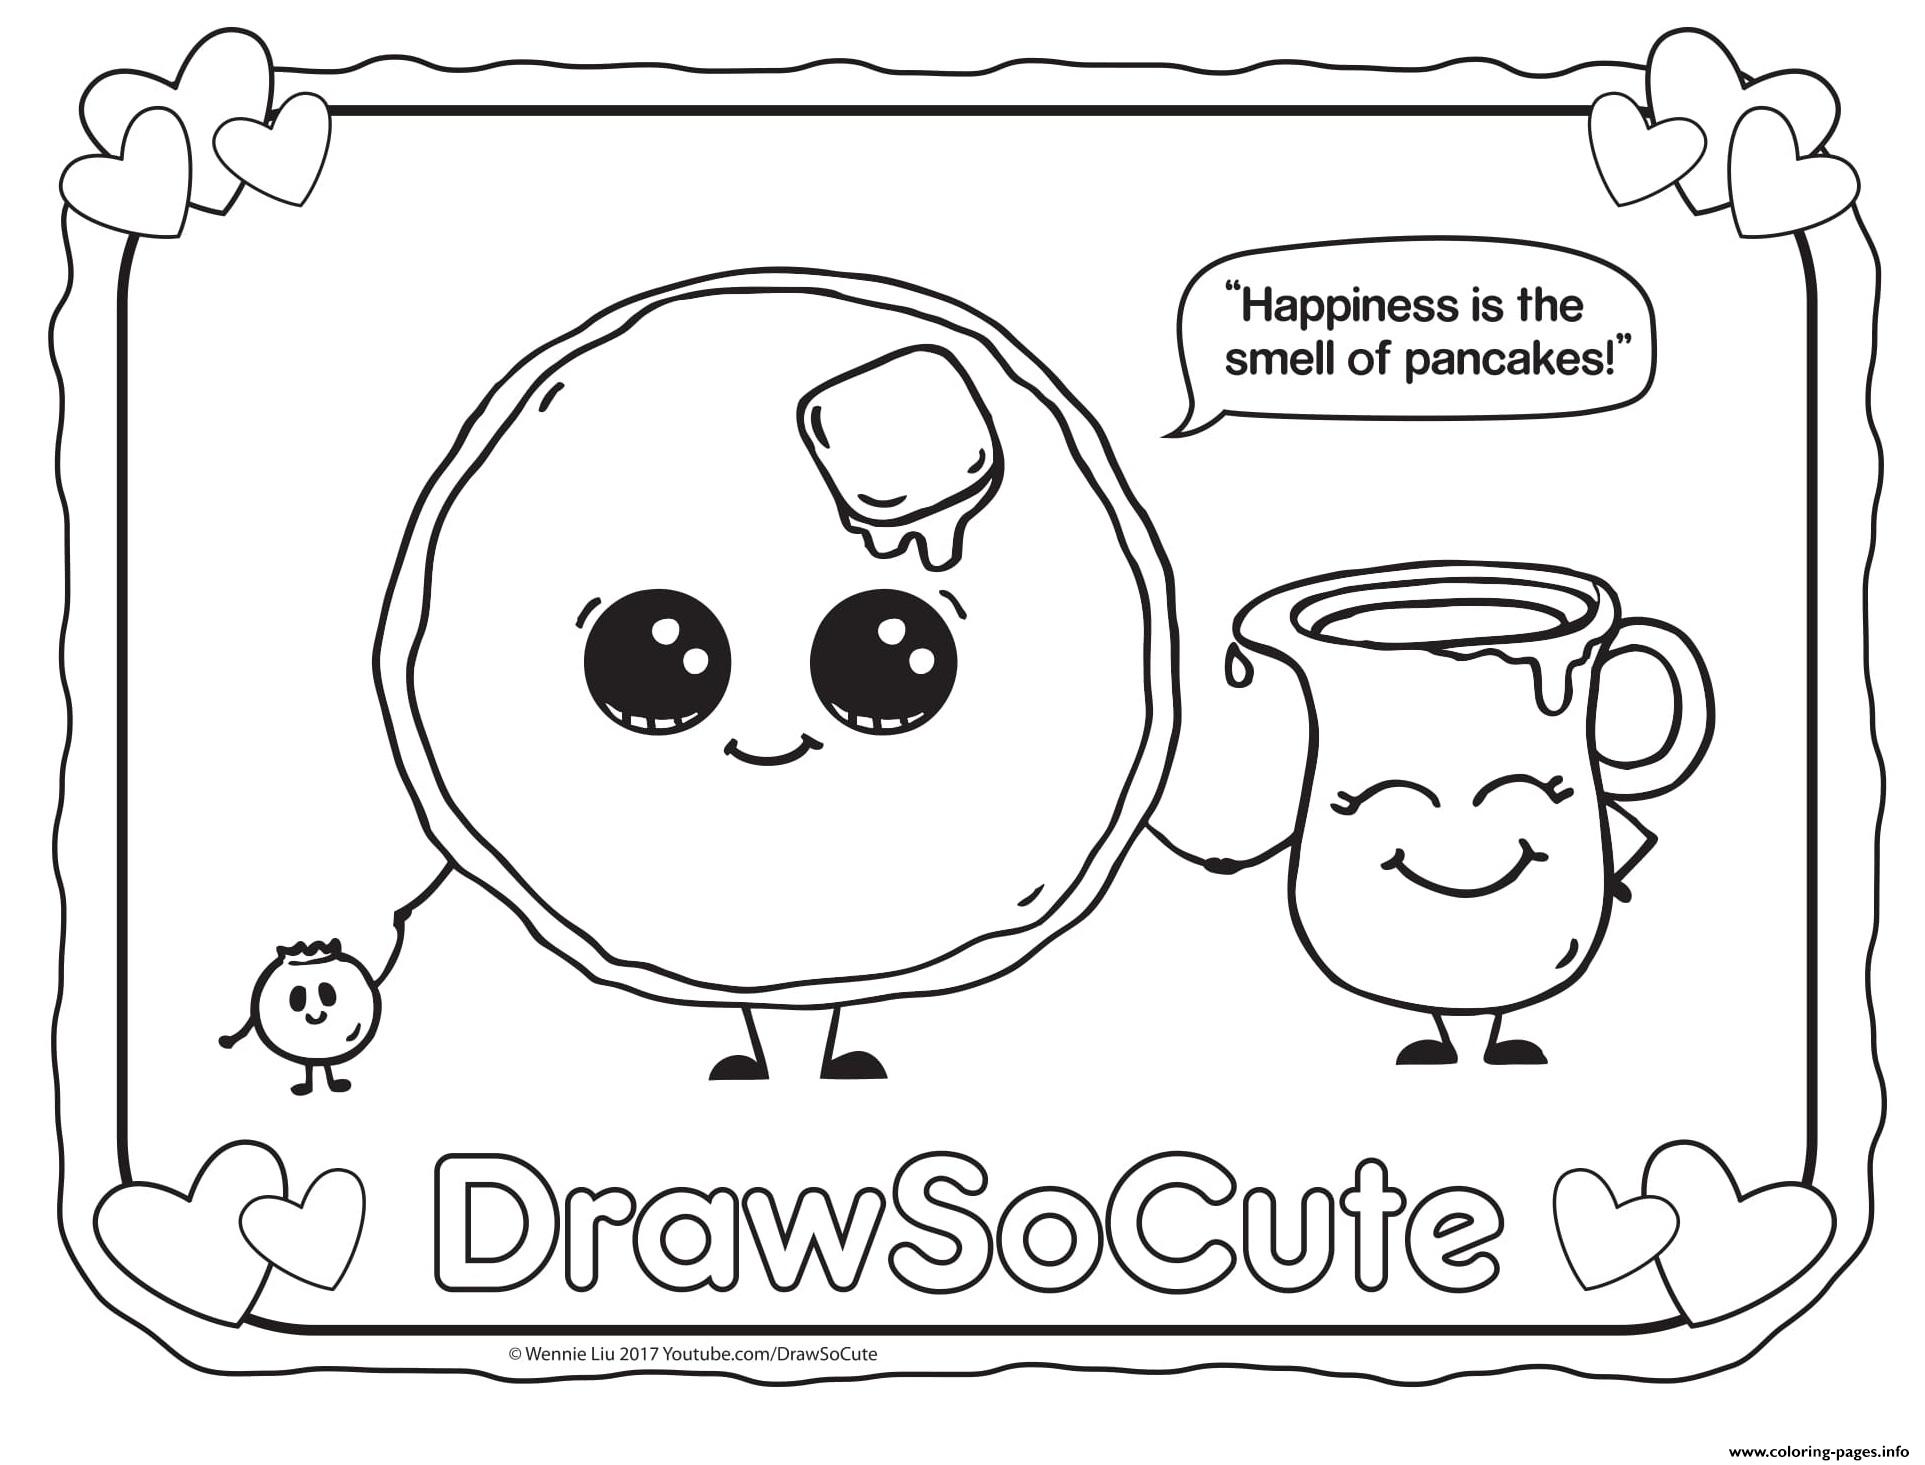 pancake-draw-so-cute-coloring-pages-printable